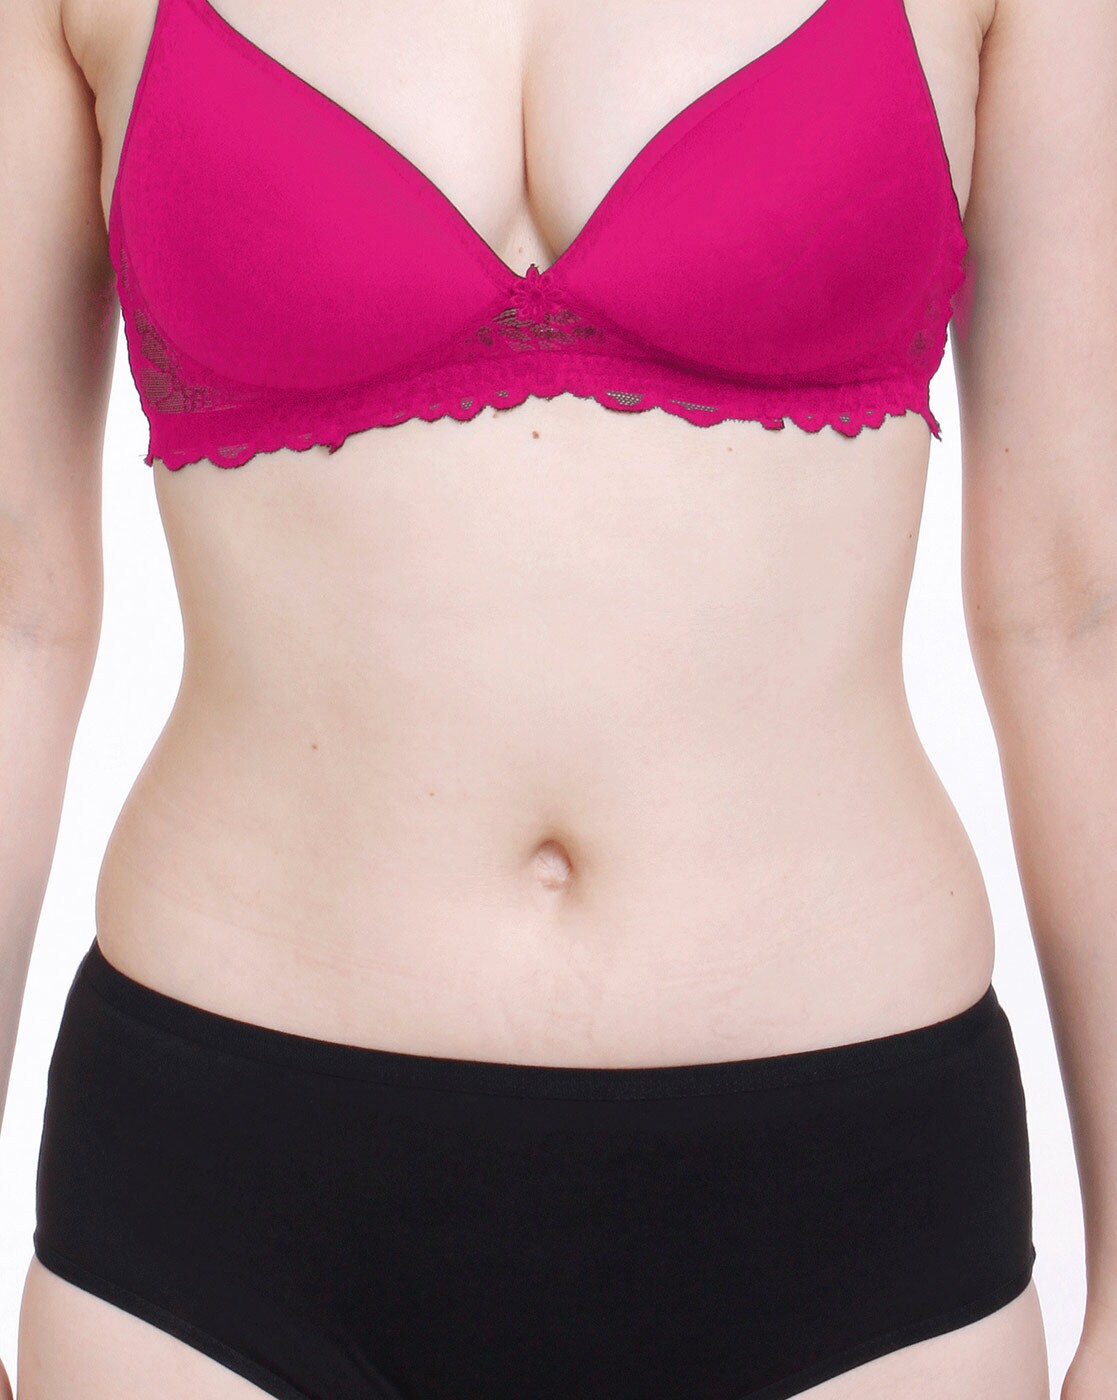 Bra and Panty Sets Only $5 From Kmart! - Common Sense With Money